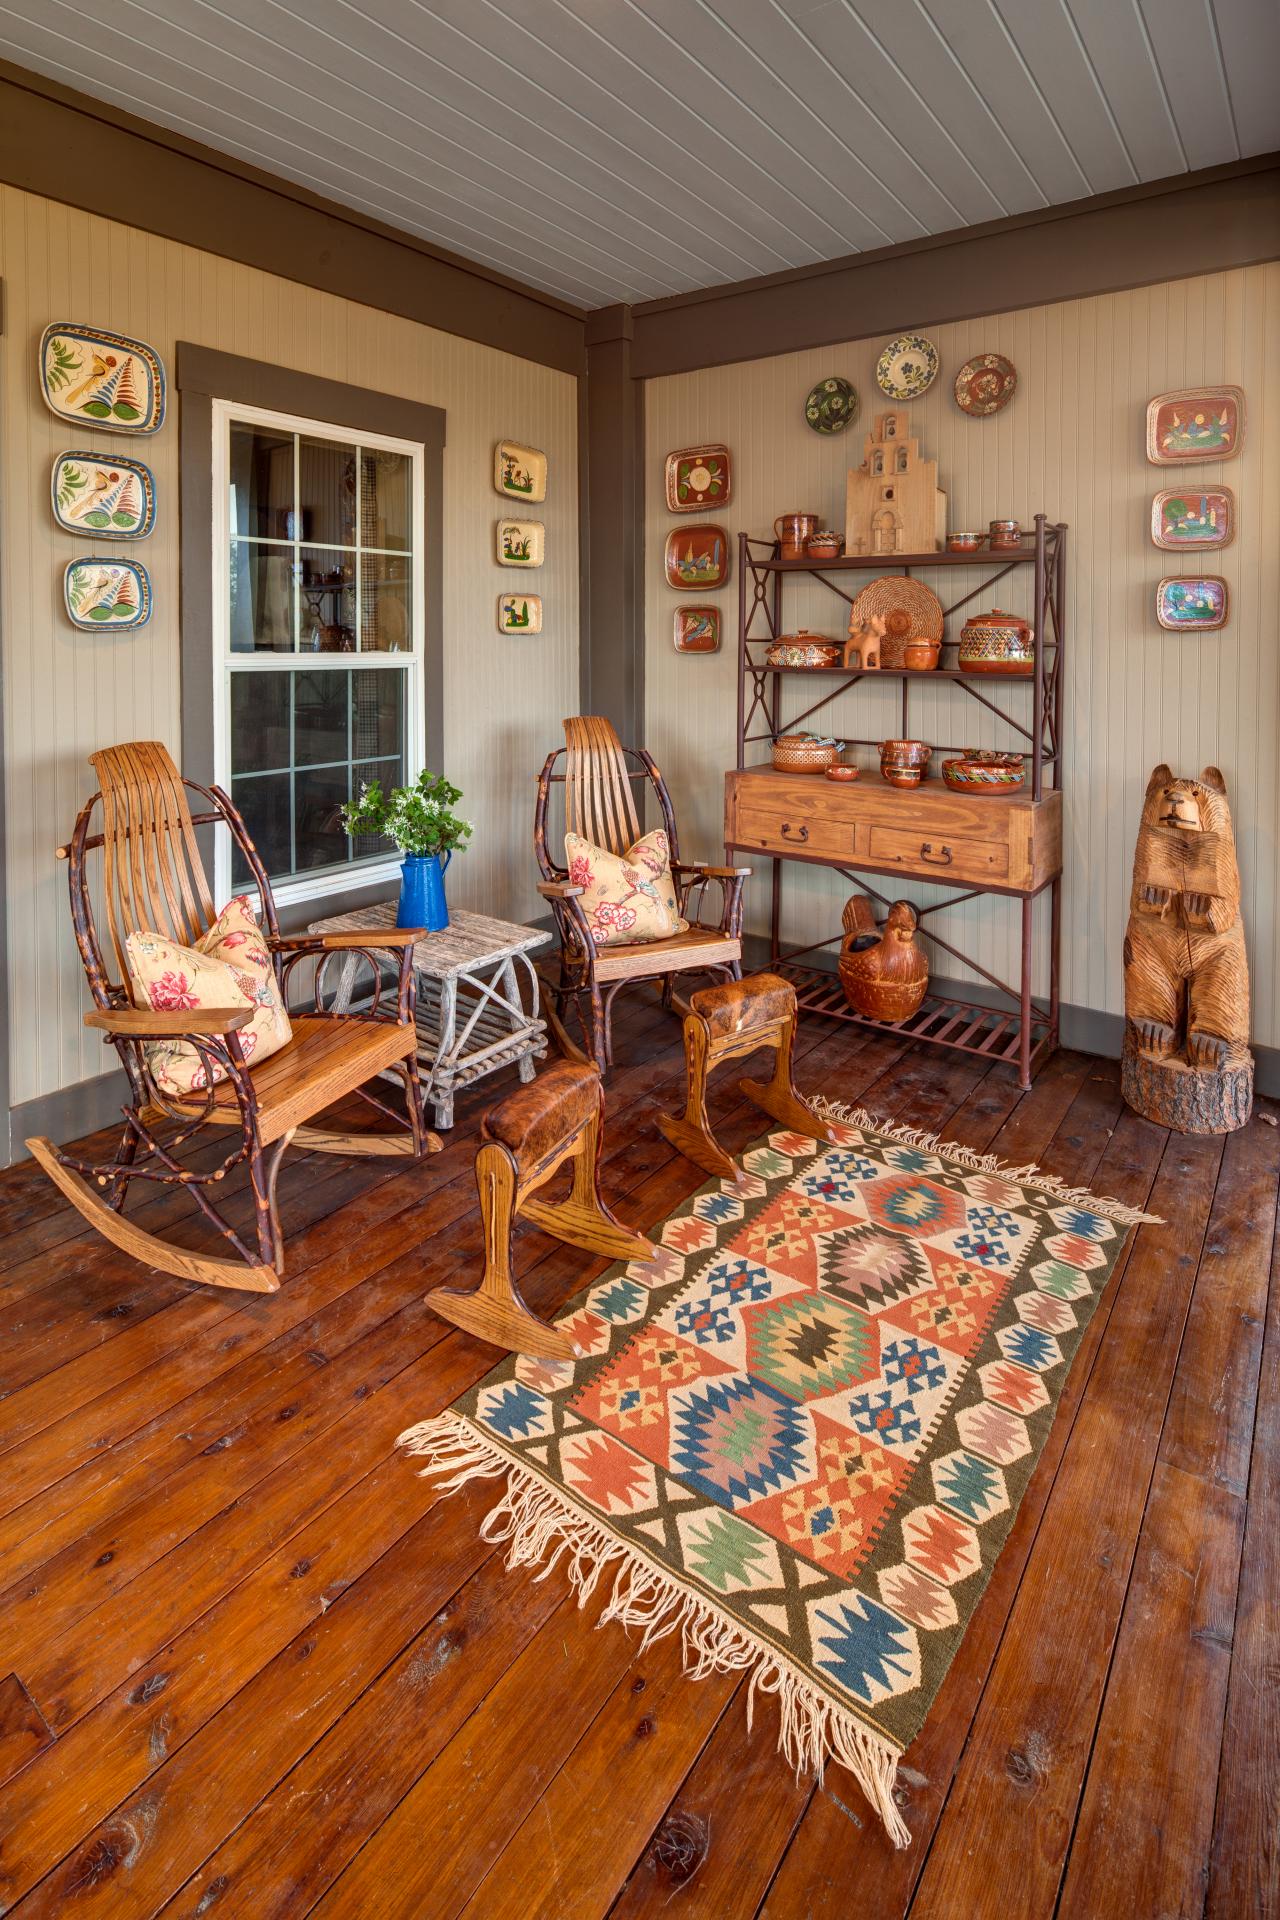 Wooden Rocking Chairs Create Cozy Porch Seating Area | HGTV